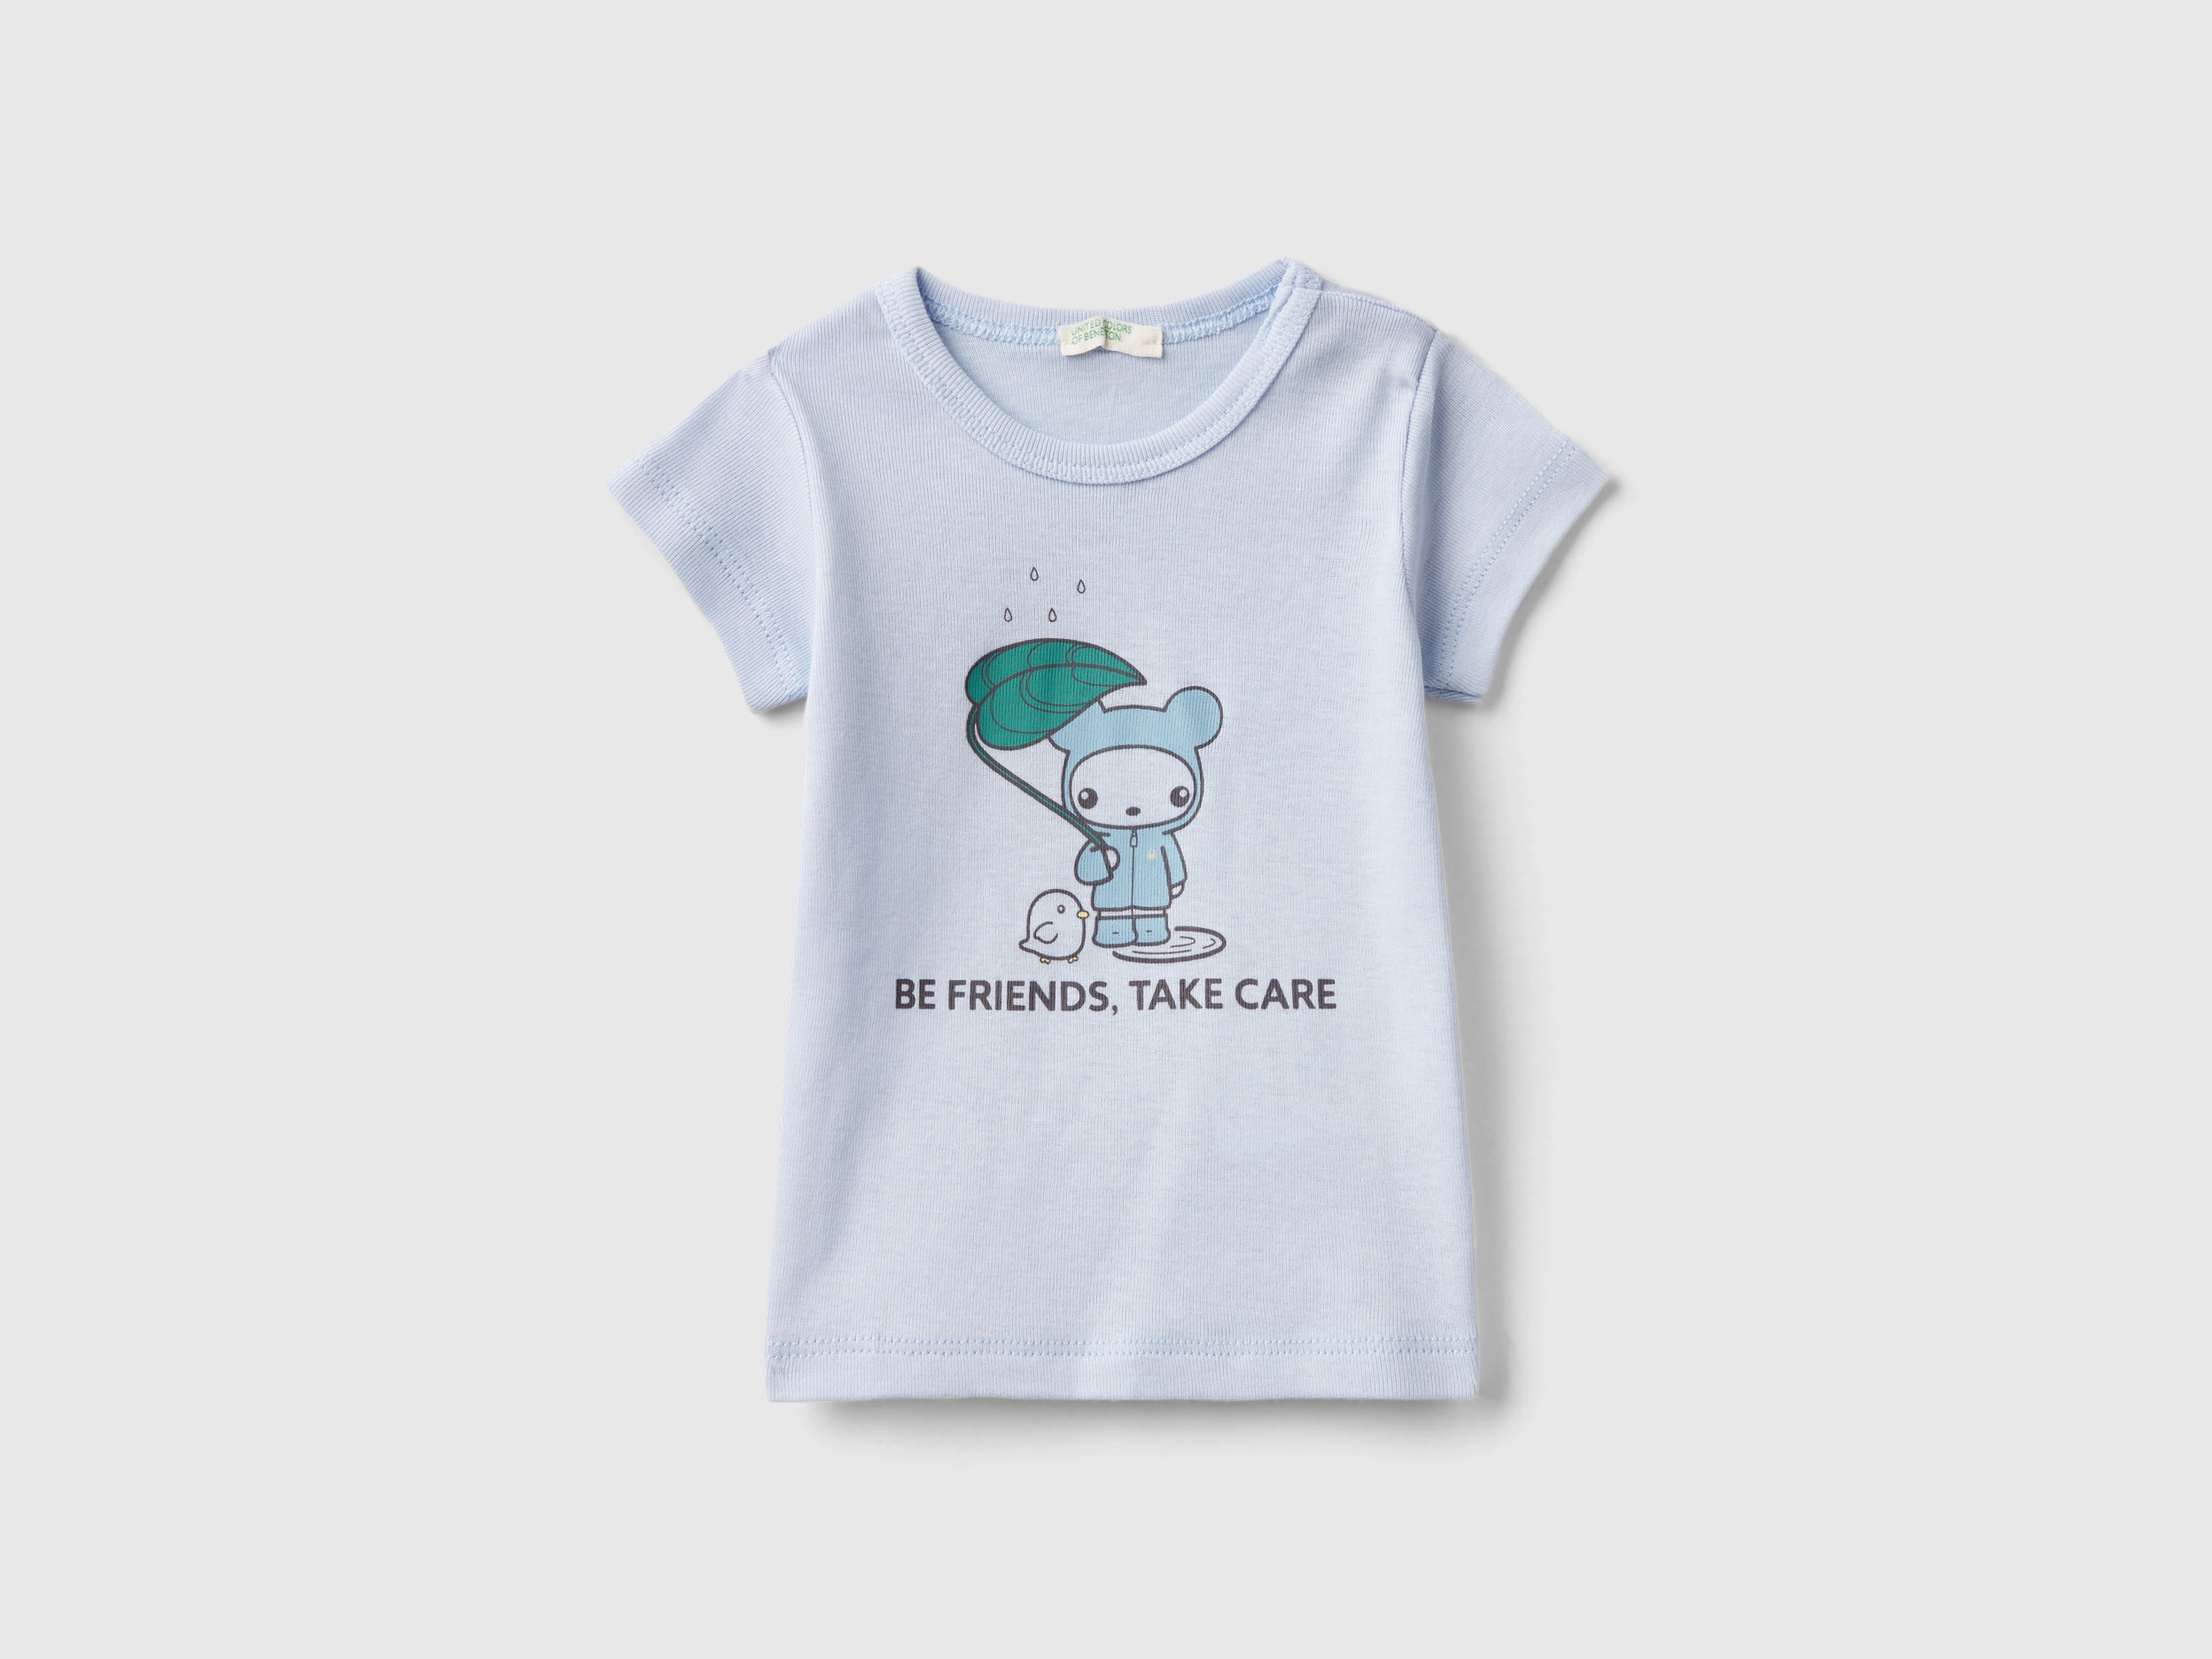 Image of Benetton, T-shirt In 100% Organic Cotton, size 82, Sky Blue, Kids